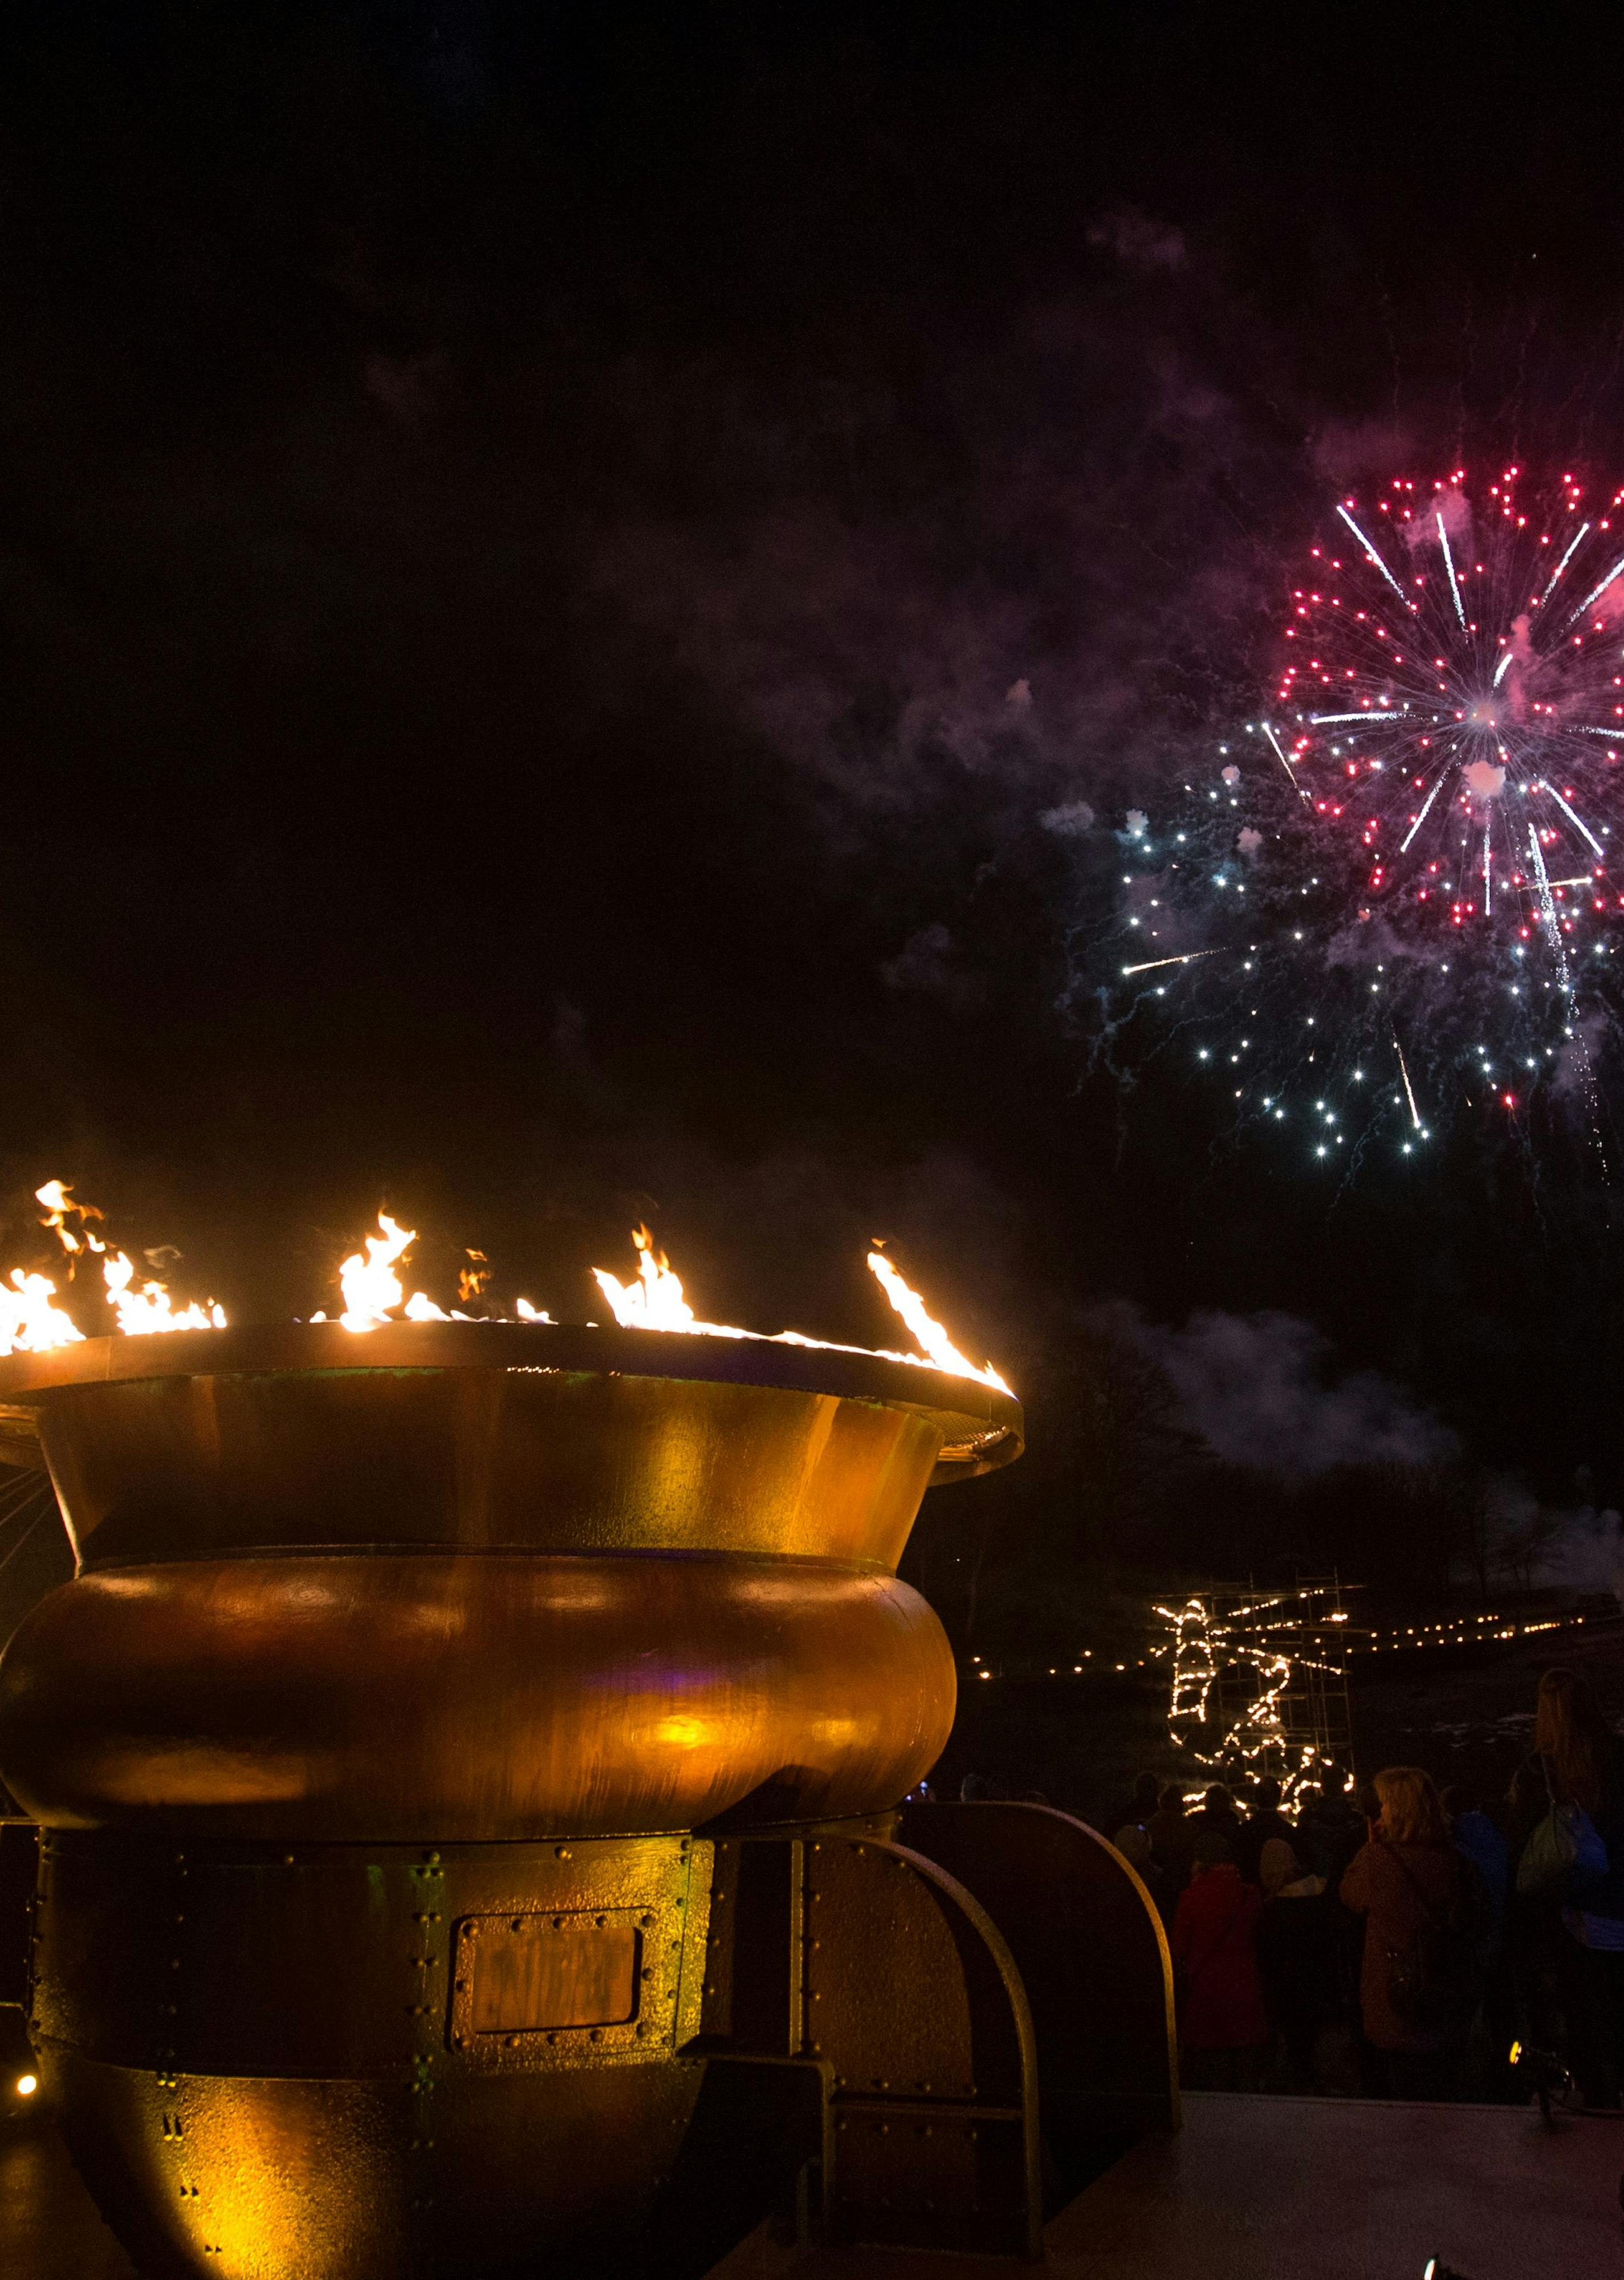 A large gold brazier with flames coming out of the top, against a night sky with fireworks